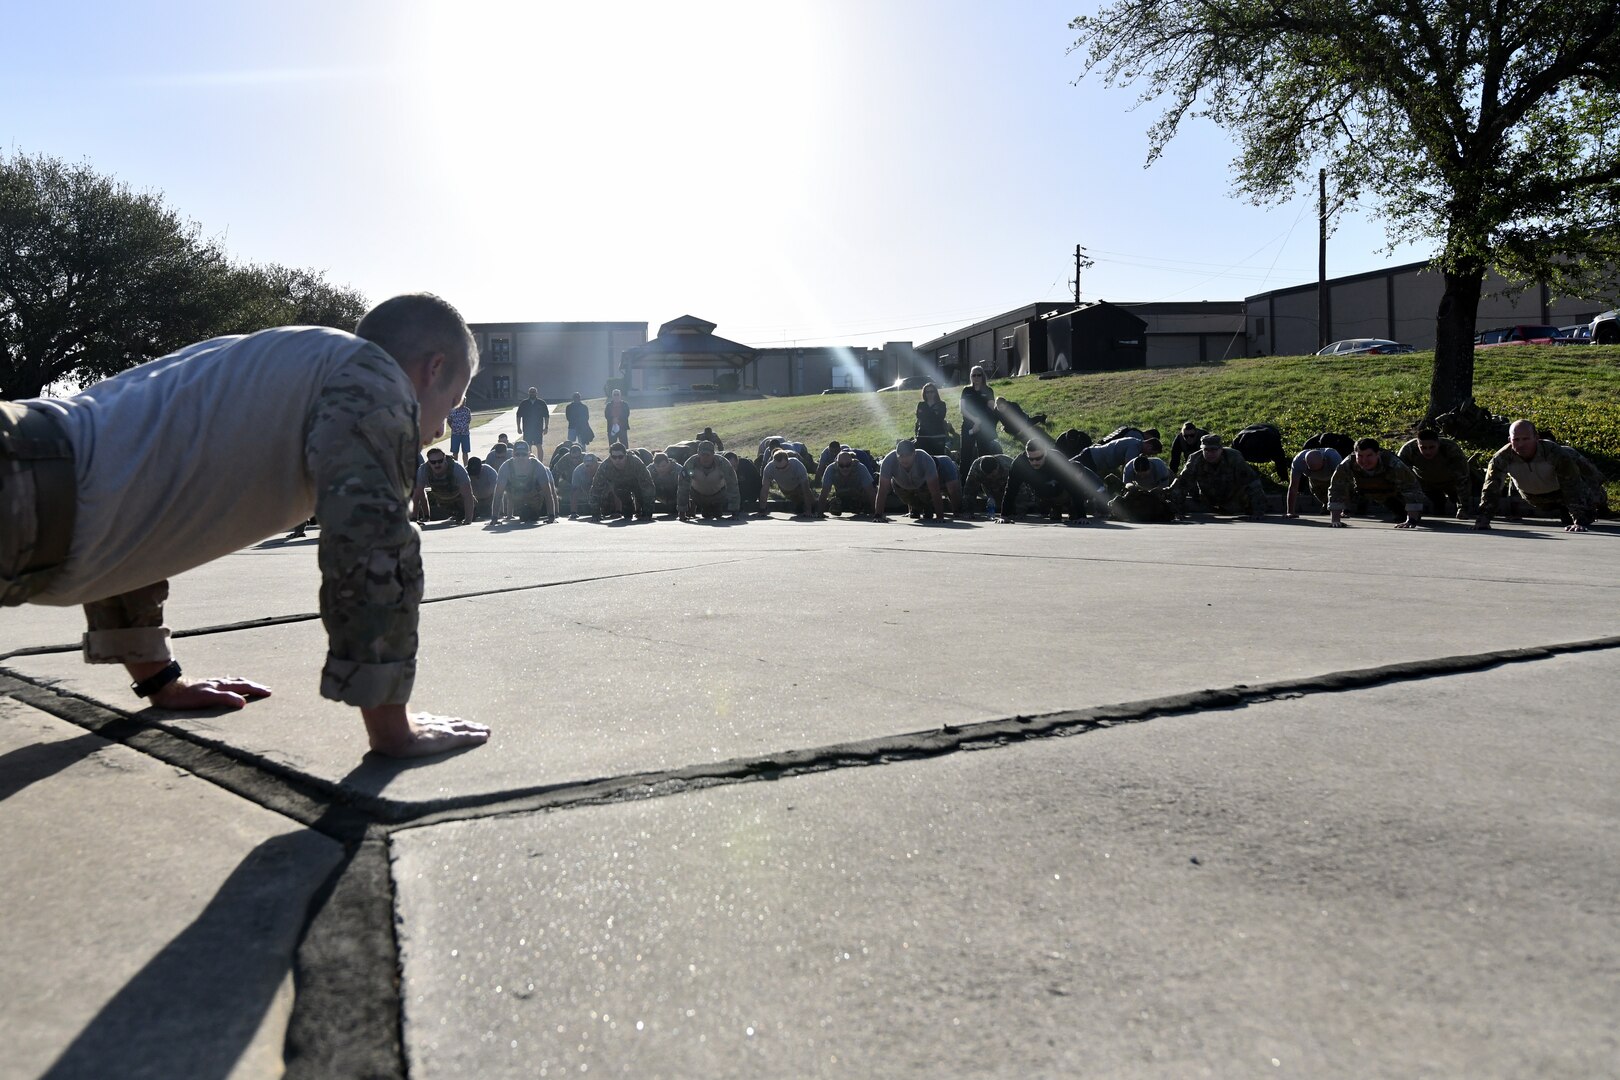 U.S. Air Force Chief Master Sgt. Todd Popovic, Special Warfare Training Wing command chief, leads participants in Memorial pushups during a rededication ceremony in honor of U.S. Air Force Lt. Col. William Schroeder and U.S. Air Force Staff Sgt. Scott Sather at the SWTW training compound Joint Base San Antonio, Chapman Training Annex, Apr. 8, 2022.  The wing and echelon units hosted a two and one-half mile ruck march followed by Memorial pushups and the unveiling of refitted memorials in coordination with Gold Star families (U.S. Air Force photo by Brian Boisvert)